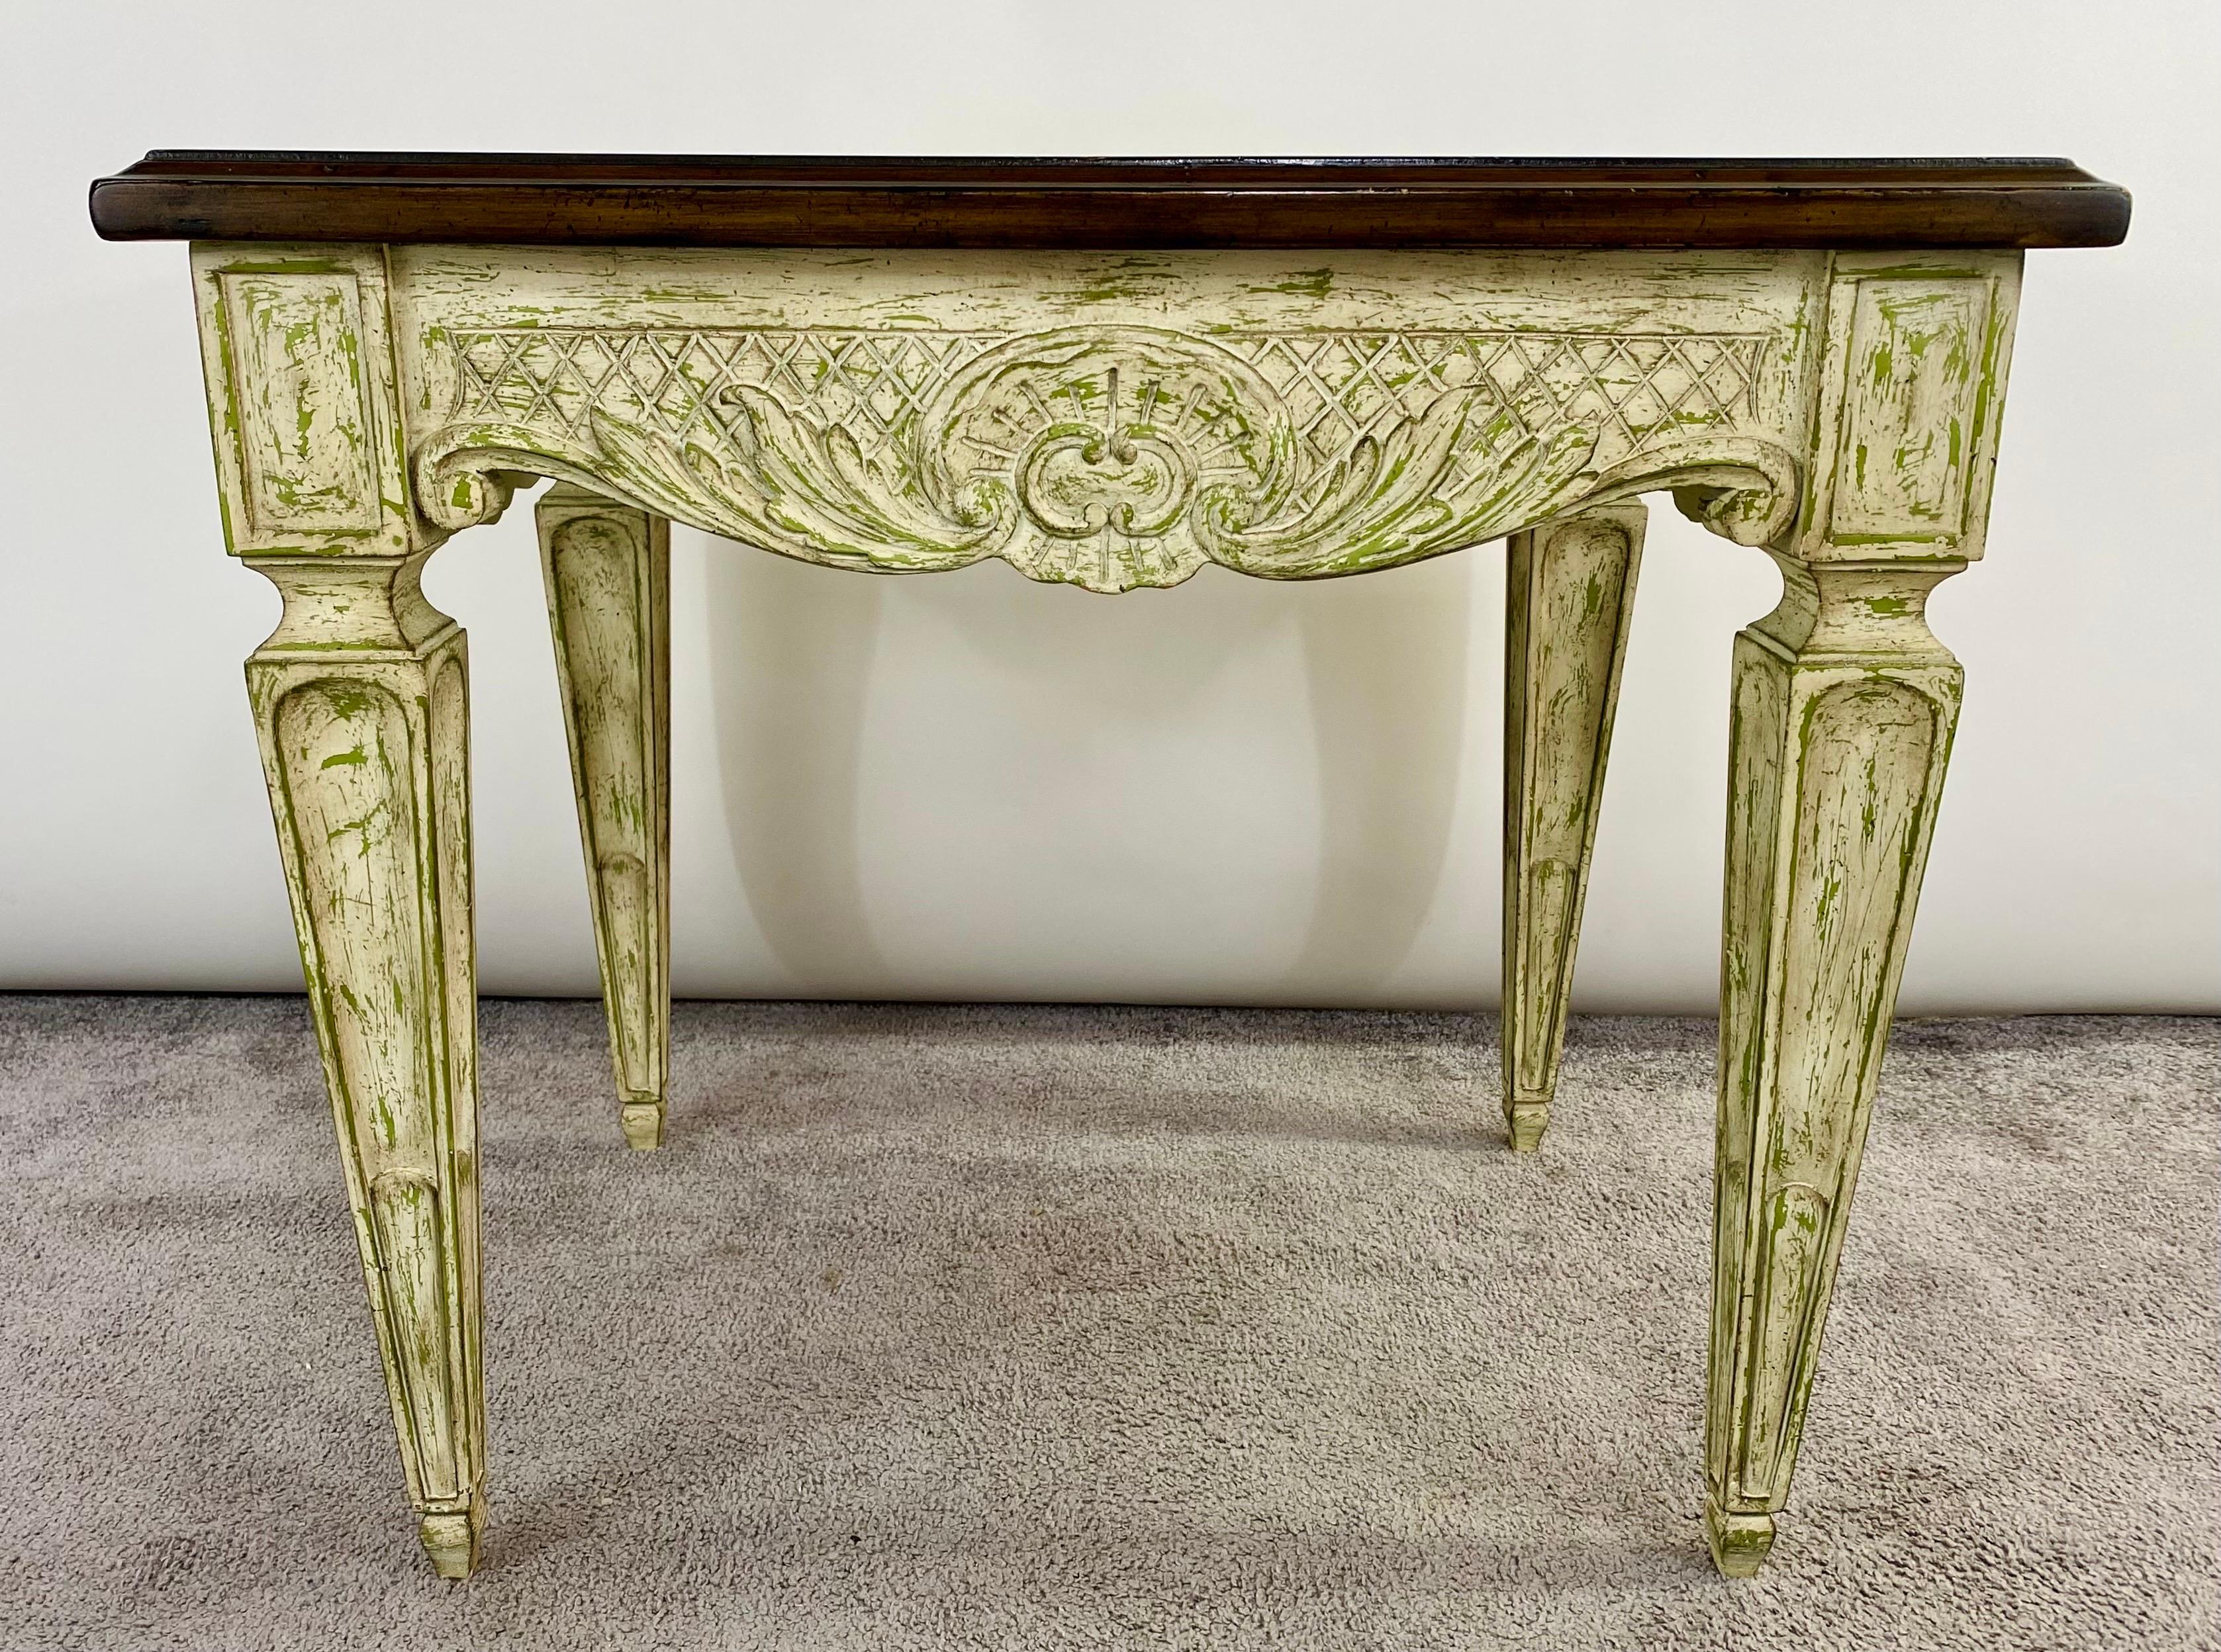 A classy French Louis XVI style side or end table. Beautifully carved and showing floral and scroll design, the table has a solid mahogany top and is raised on four solid fluted legs in an inverted truncated pyramid shape. The table features a